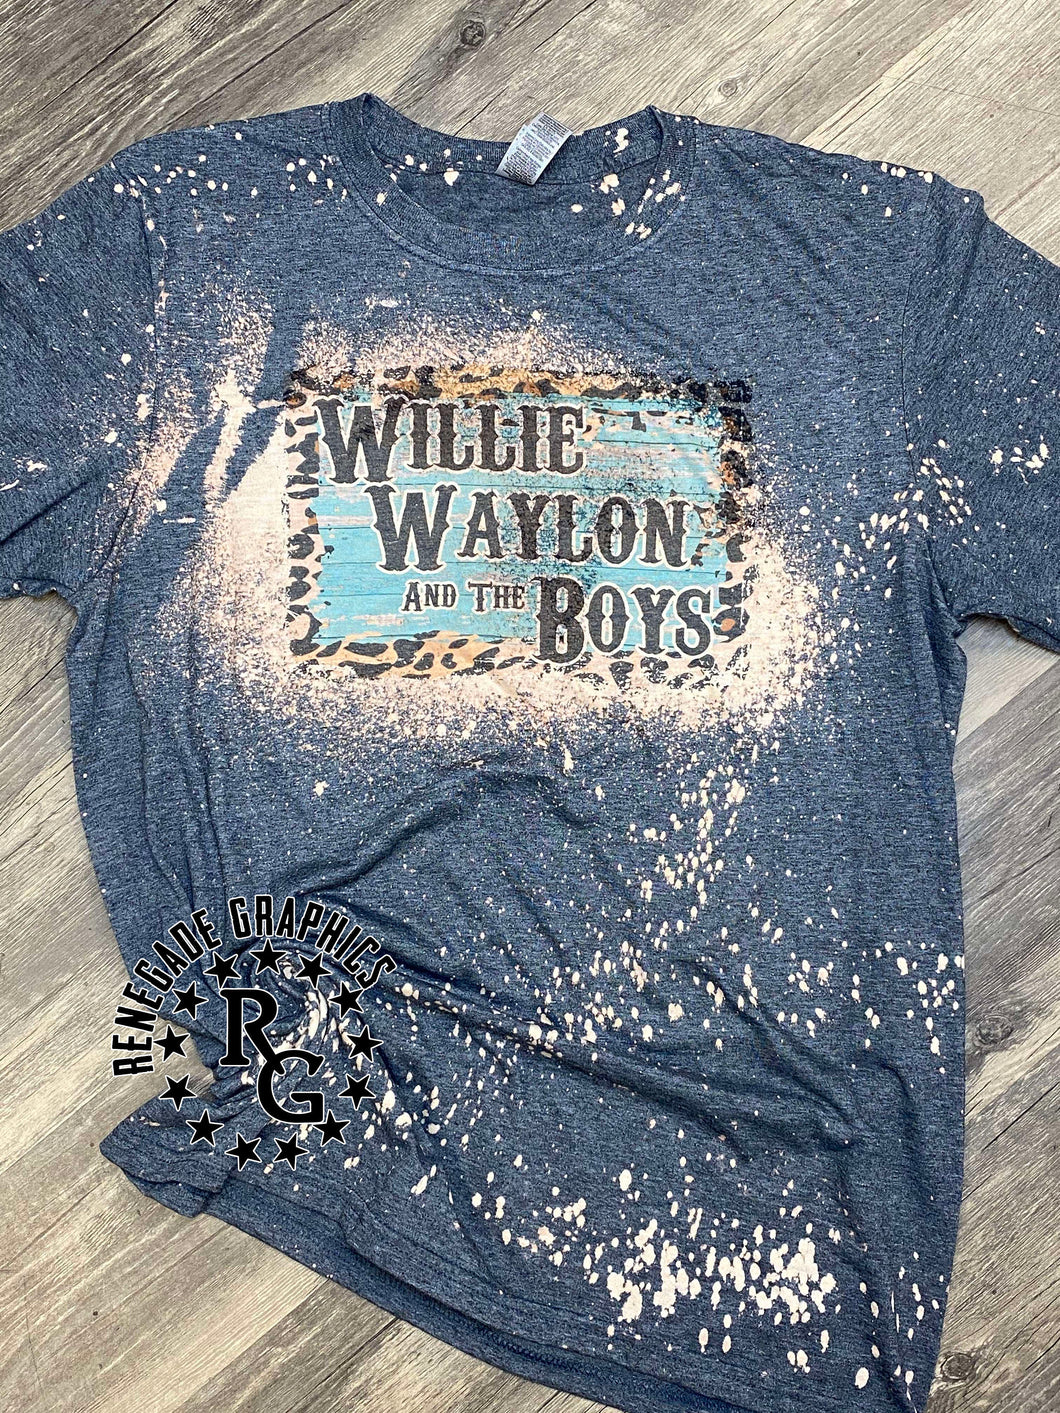 Willie Waylon & The Boys | Country Music | Outlaw | Vintage | Bleached Shirt